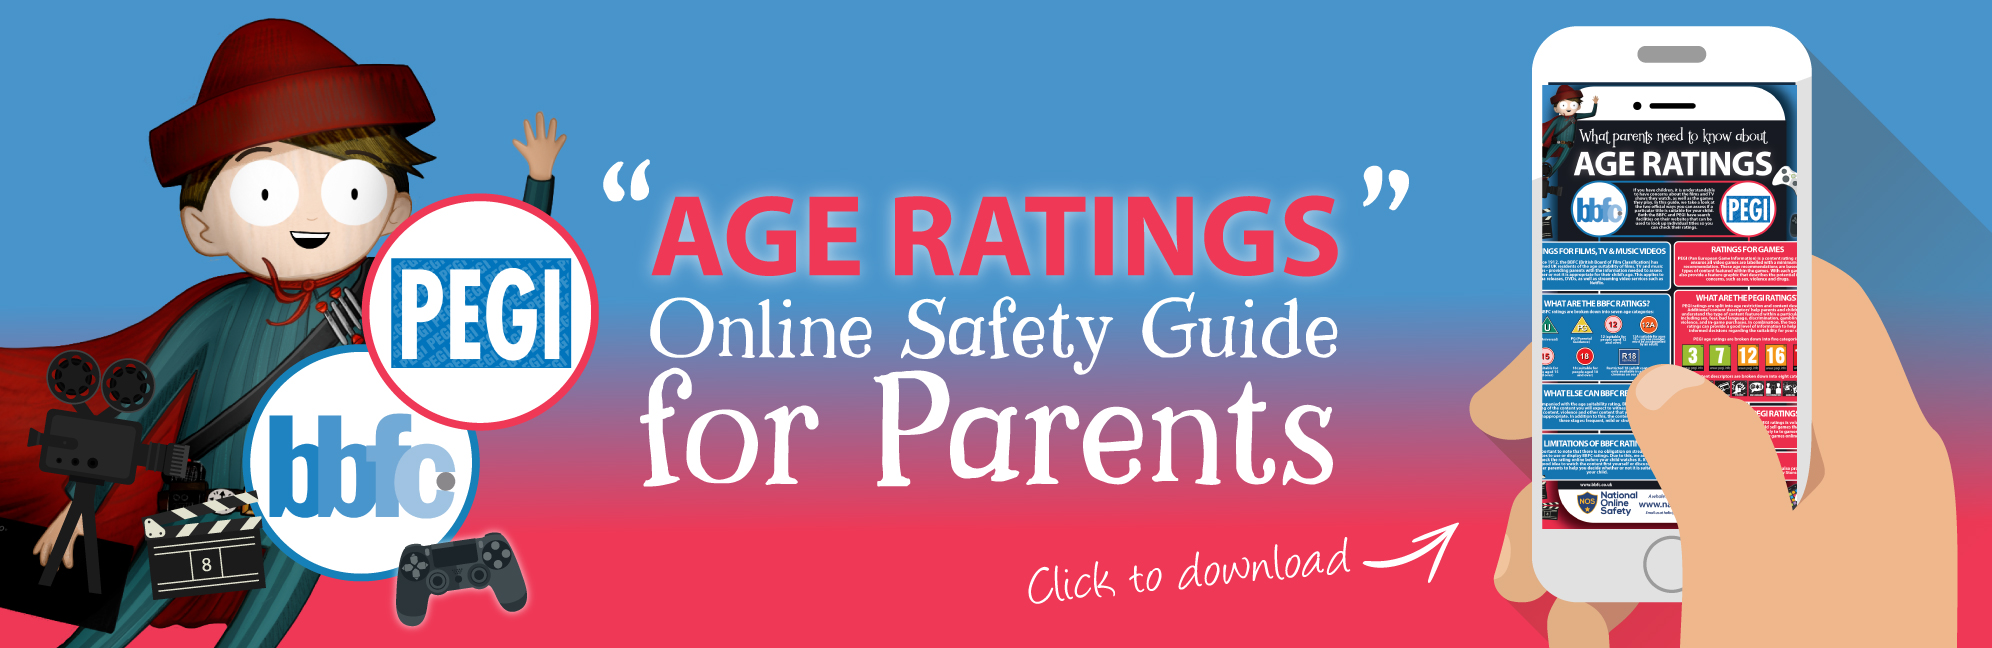 AGE-Ratings-Web-Banner